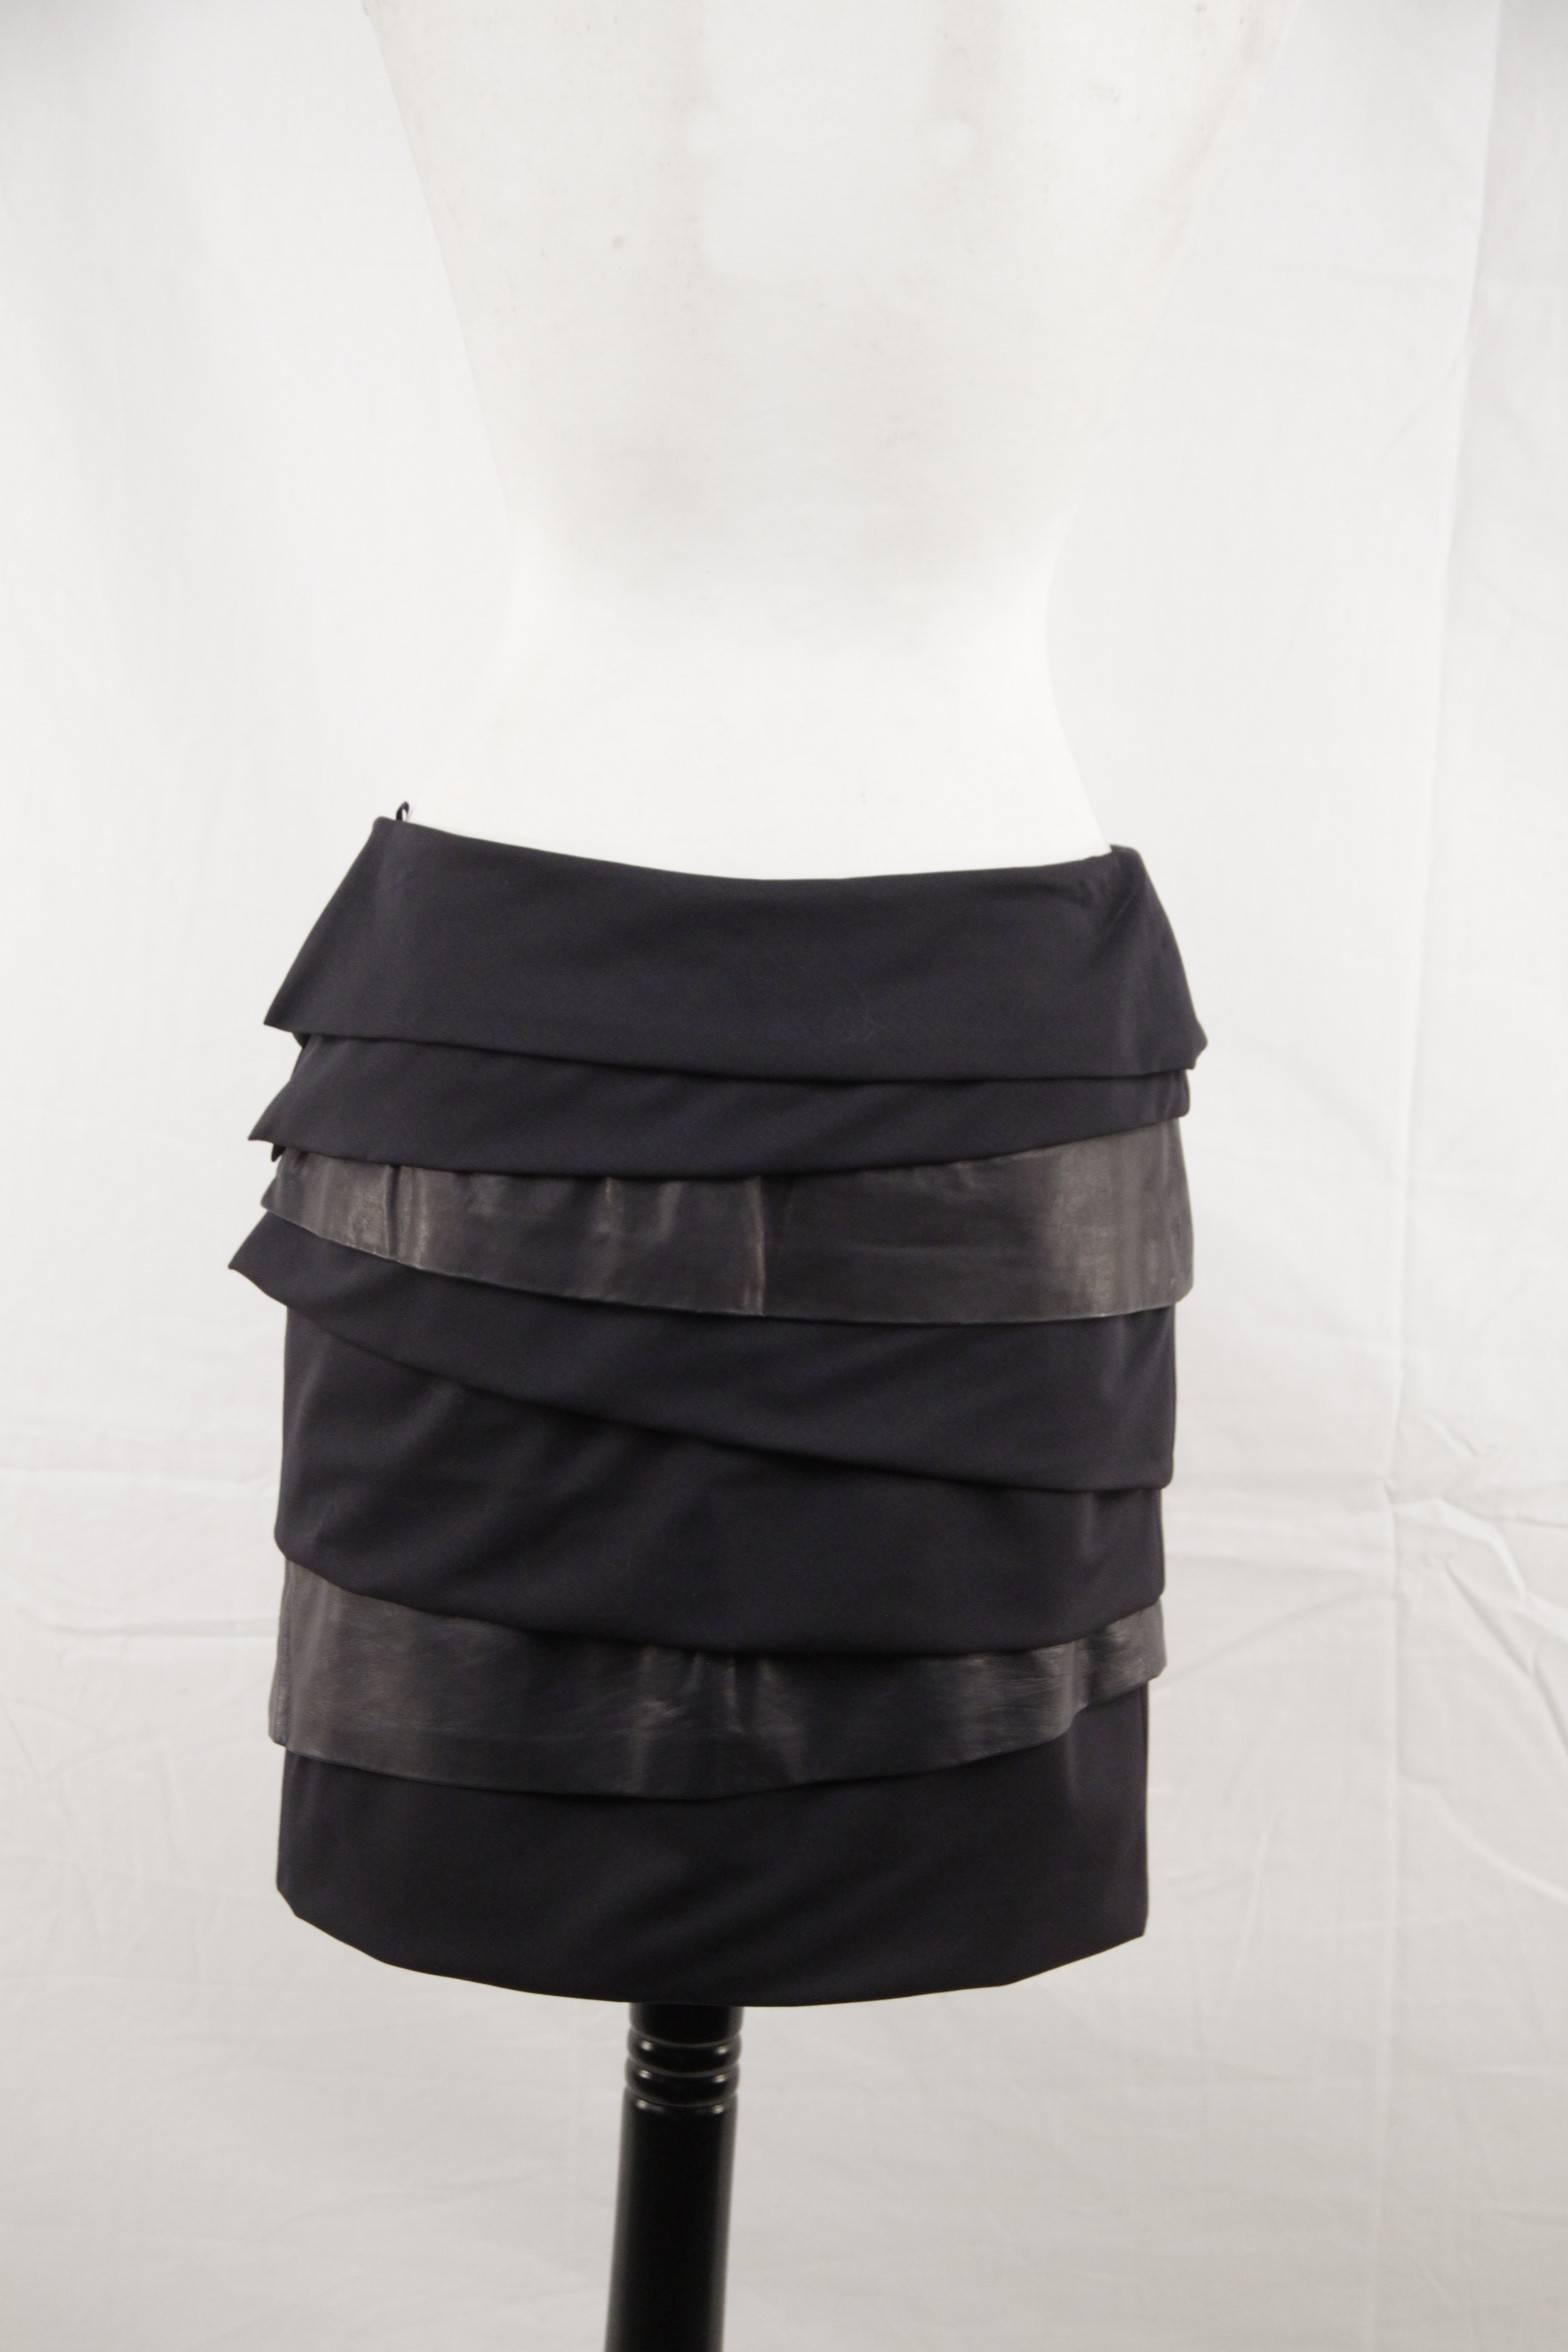 Women's VERSACE Navy Blue Wool & Leather TIERED SKIRT Size 38